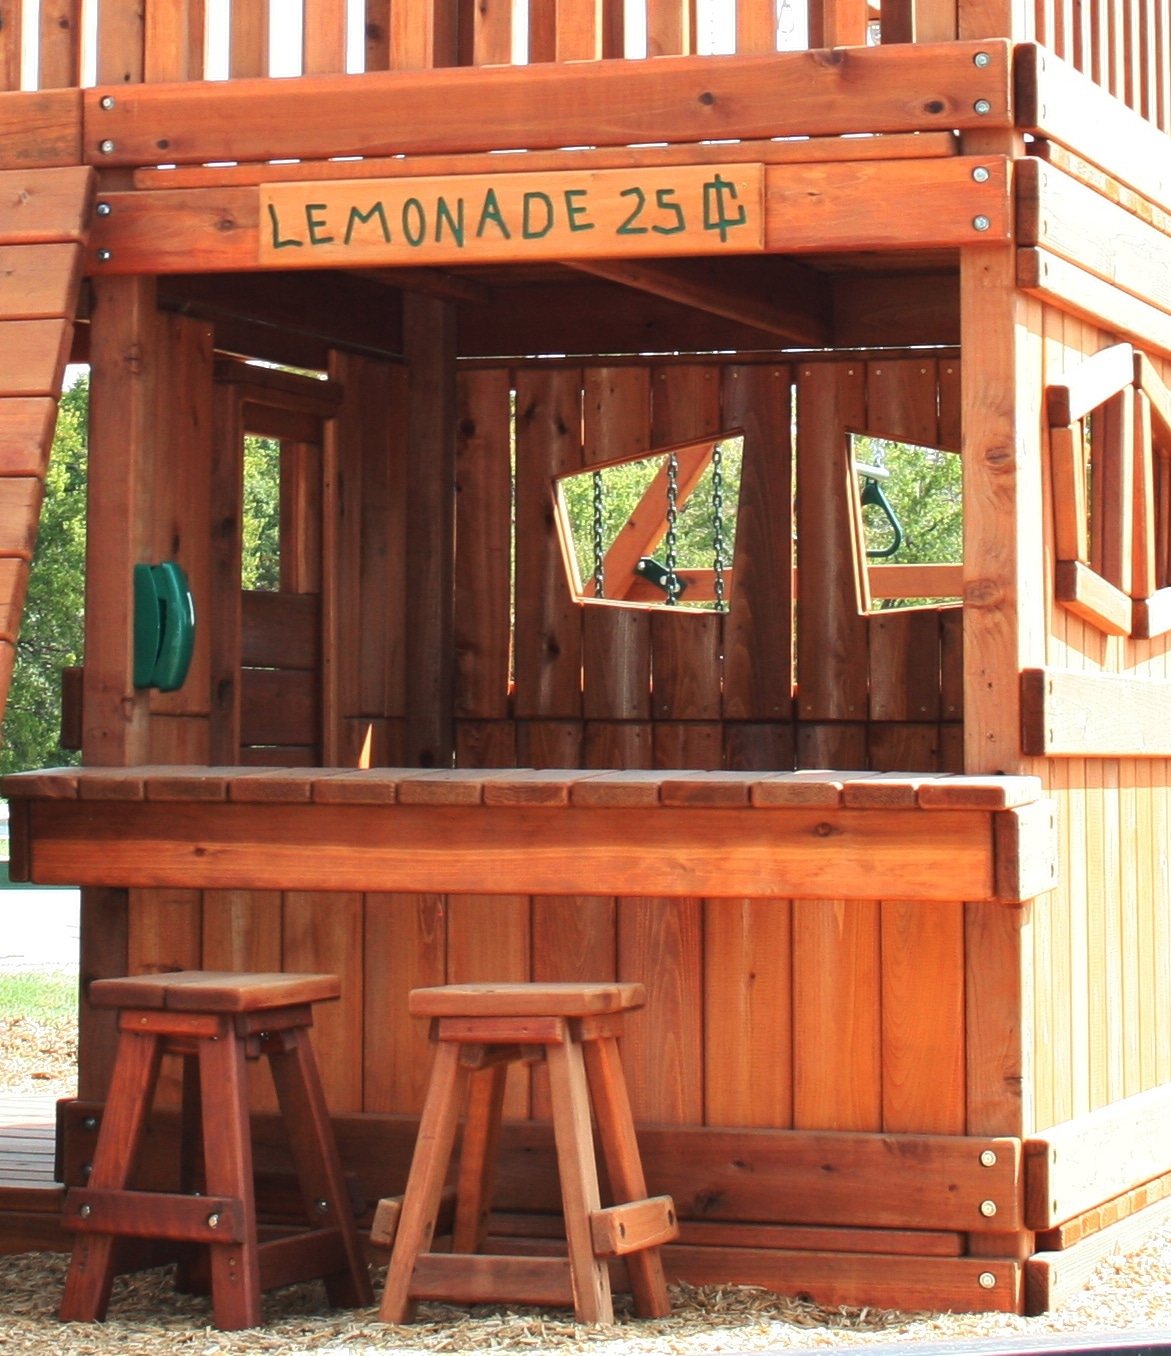 additions swing set components, lemonade stand with counter, sign, and stools built into the lower cabin of this redwood swing set